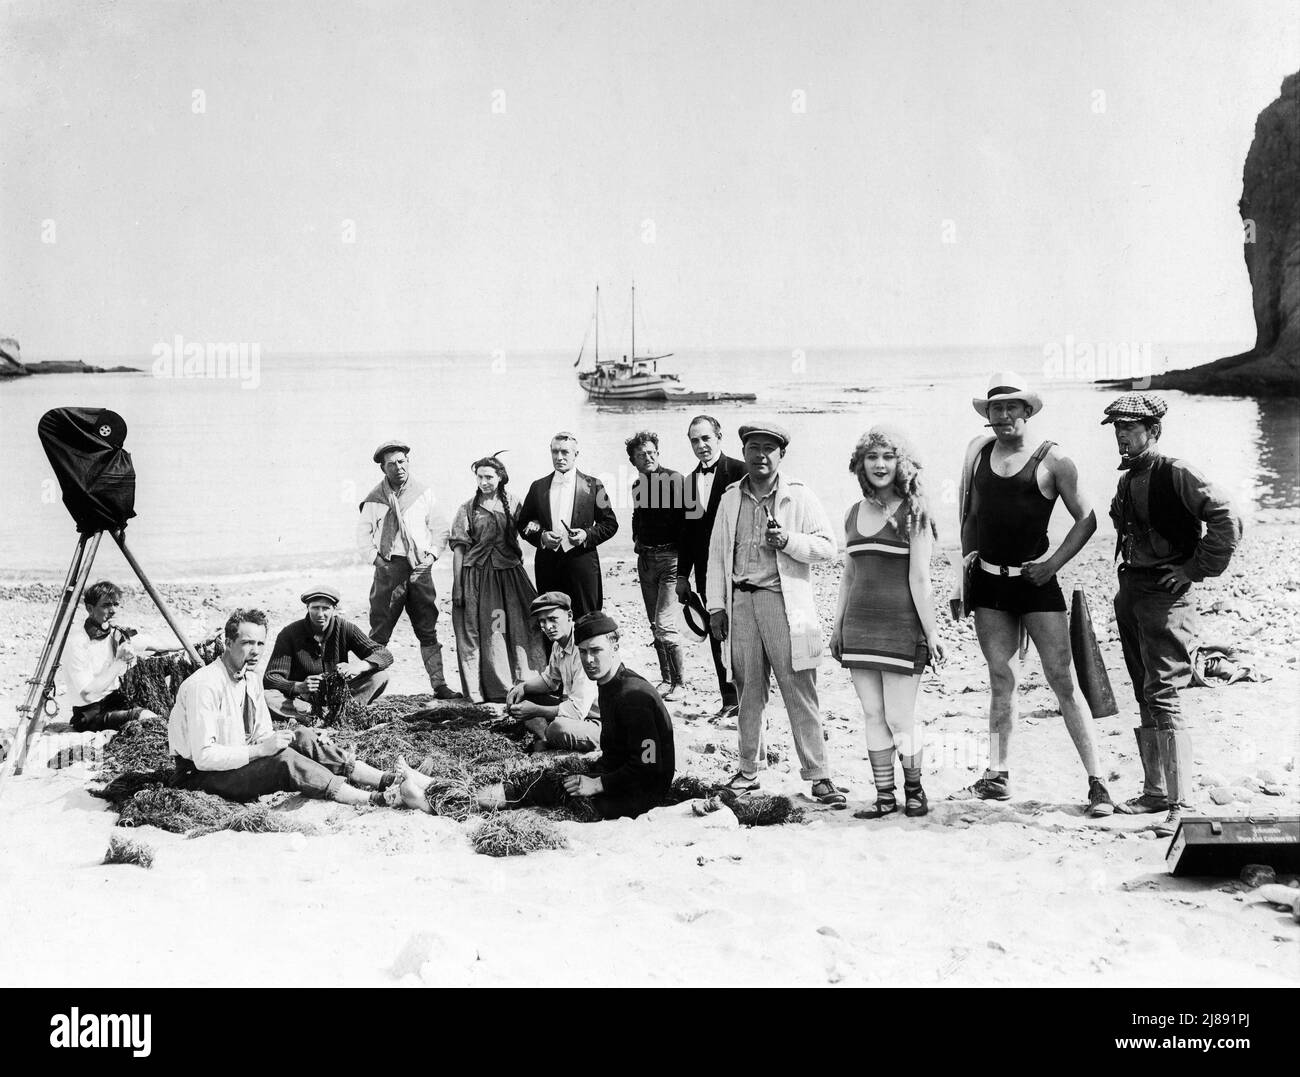 LOUISE LOVELY and Director ALLEN HOLUBAR (in black bathing outfit) with Movie Crew and Cast including likely Cinematographer ROY H. KLAFFKI (with cap and pipe) and actors HELEN WRIGHT and SYDNEY DEANE on set location candid on Catalina Island California during filming of SIRENS OF THE SEA  aka DARLINGS OF THE GODS (in UK) 1917 director / scenario ALLEN HOLUBAR story Grace Helen Bailey cinematographer Roy H. Klaffki Jewel Productions / Universal Film Manufacturing Company Stock Photo